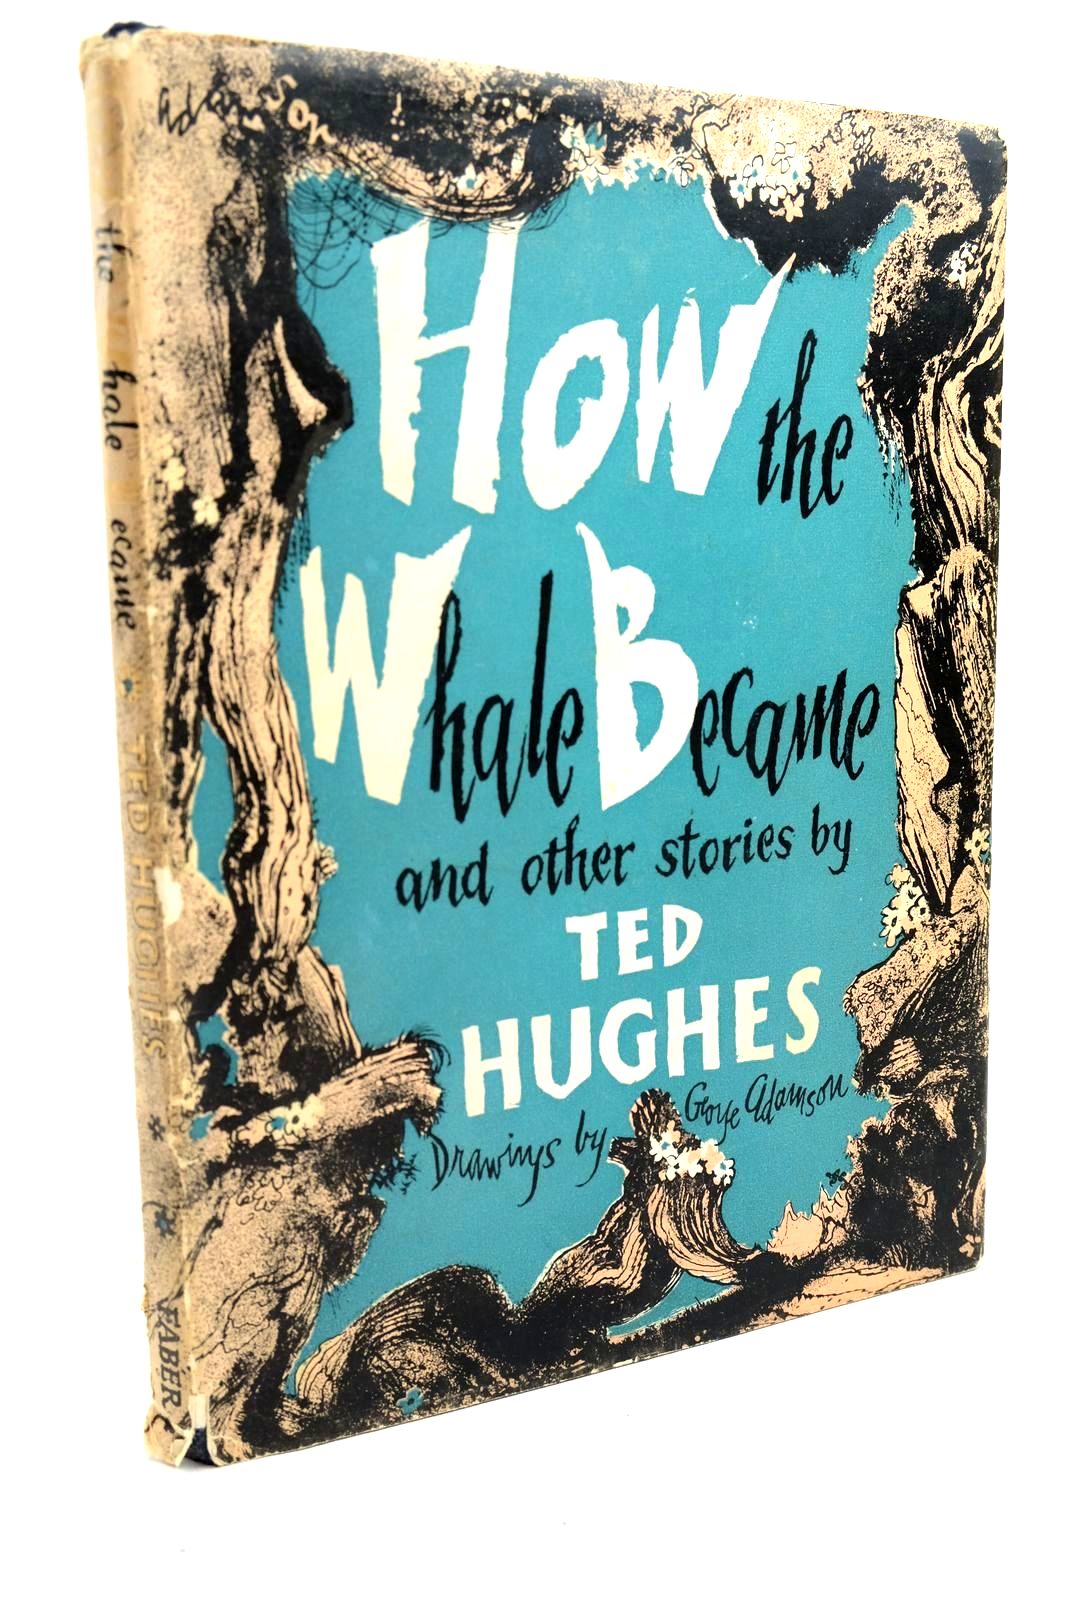 Photo of HOW THE WHALE BECAME written by Hughes, Ted illustrated by Adamson, George published by Faber & Faber Ltd. (STOCK CODE: 1321607)  for sale by Stella & Rose's Books